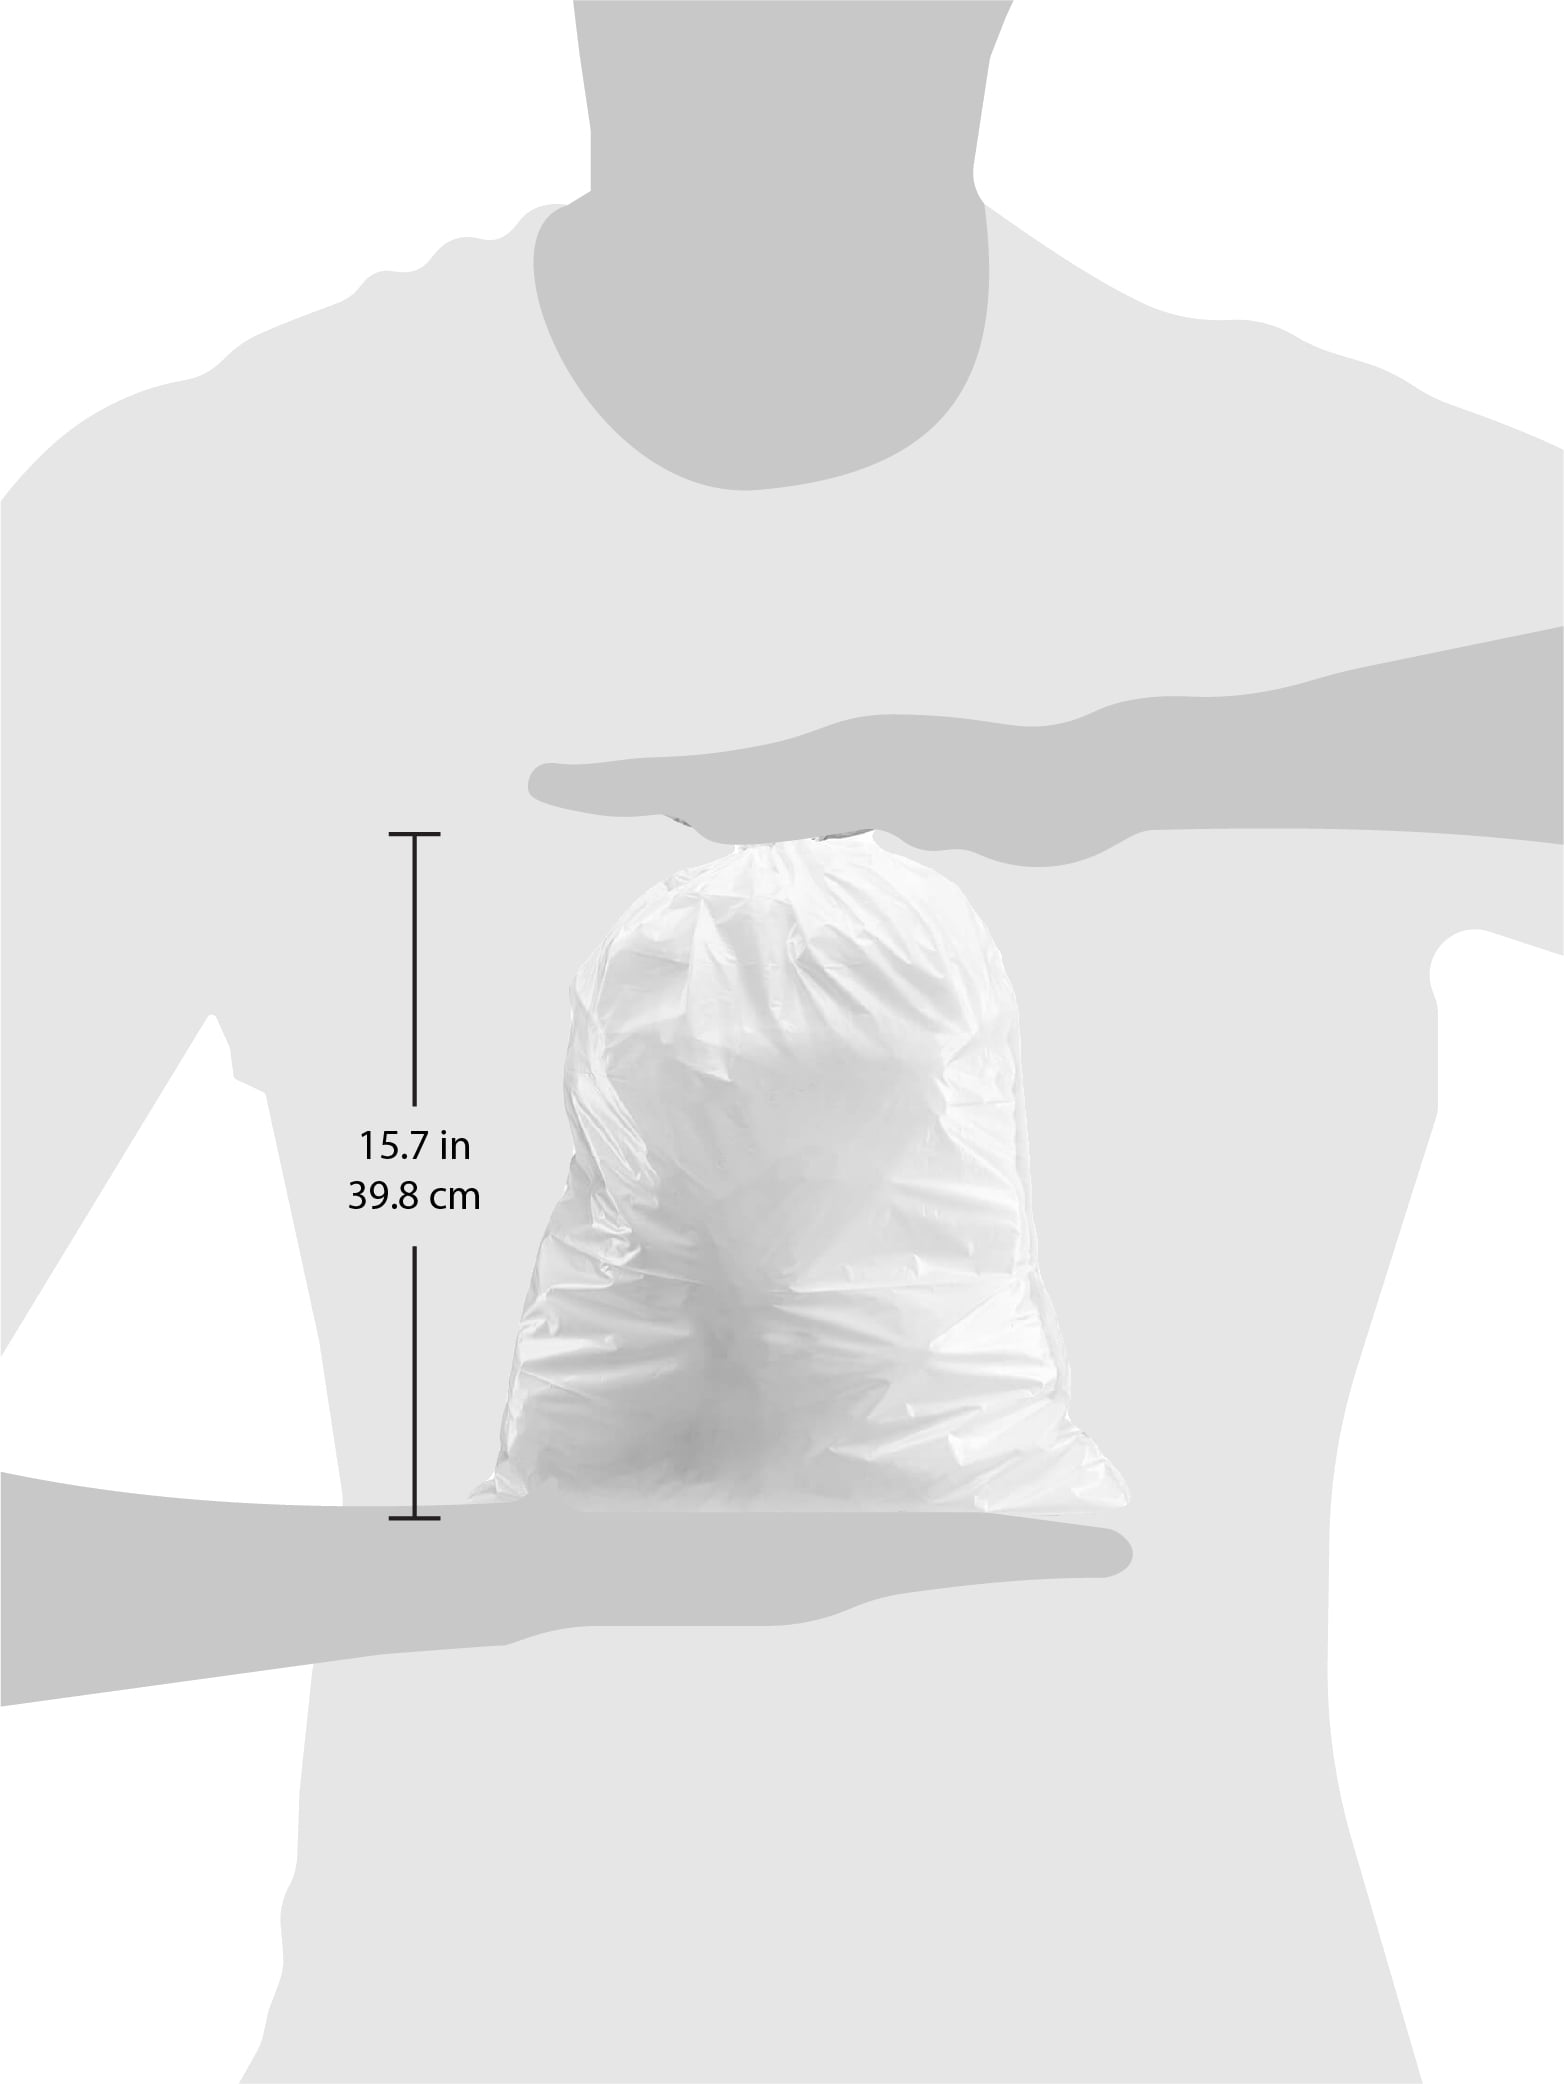 Simplelisa Code P 2 Packs(100 Count) 13-16 Gallon Heavy Duty Drawstring  Plastic Trash Bags Compatible with simplehuman Code P | 1.2 Mil | White